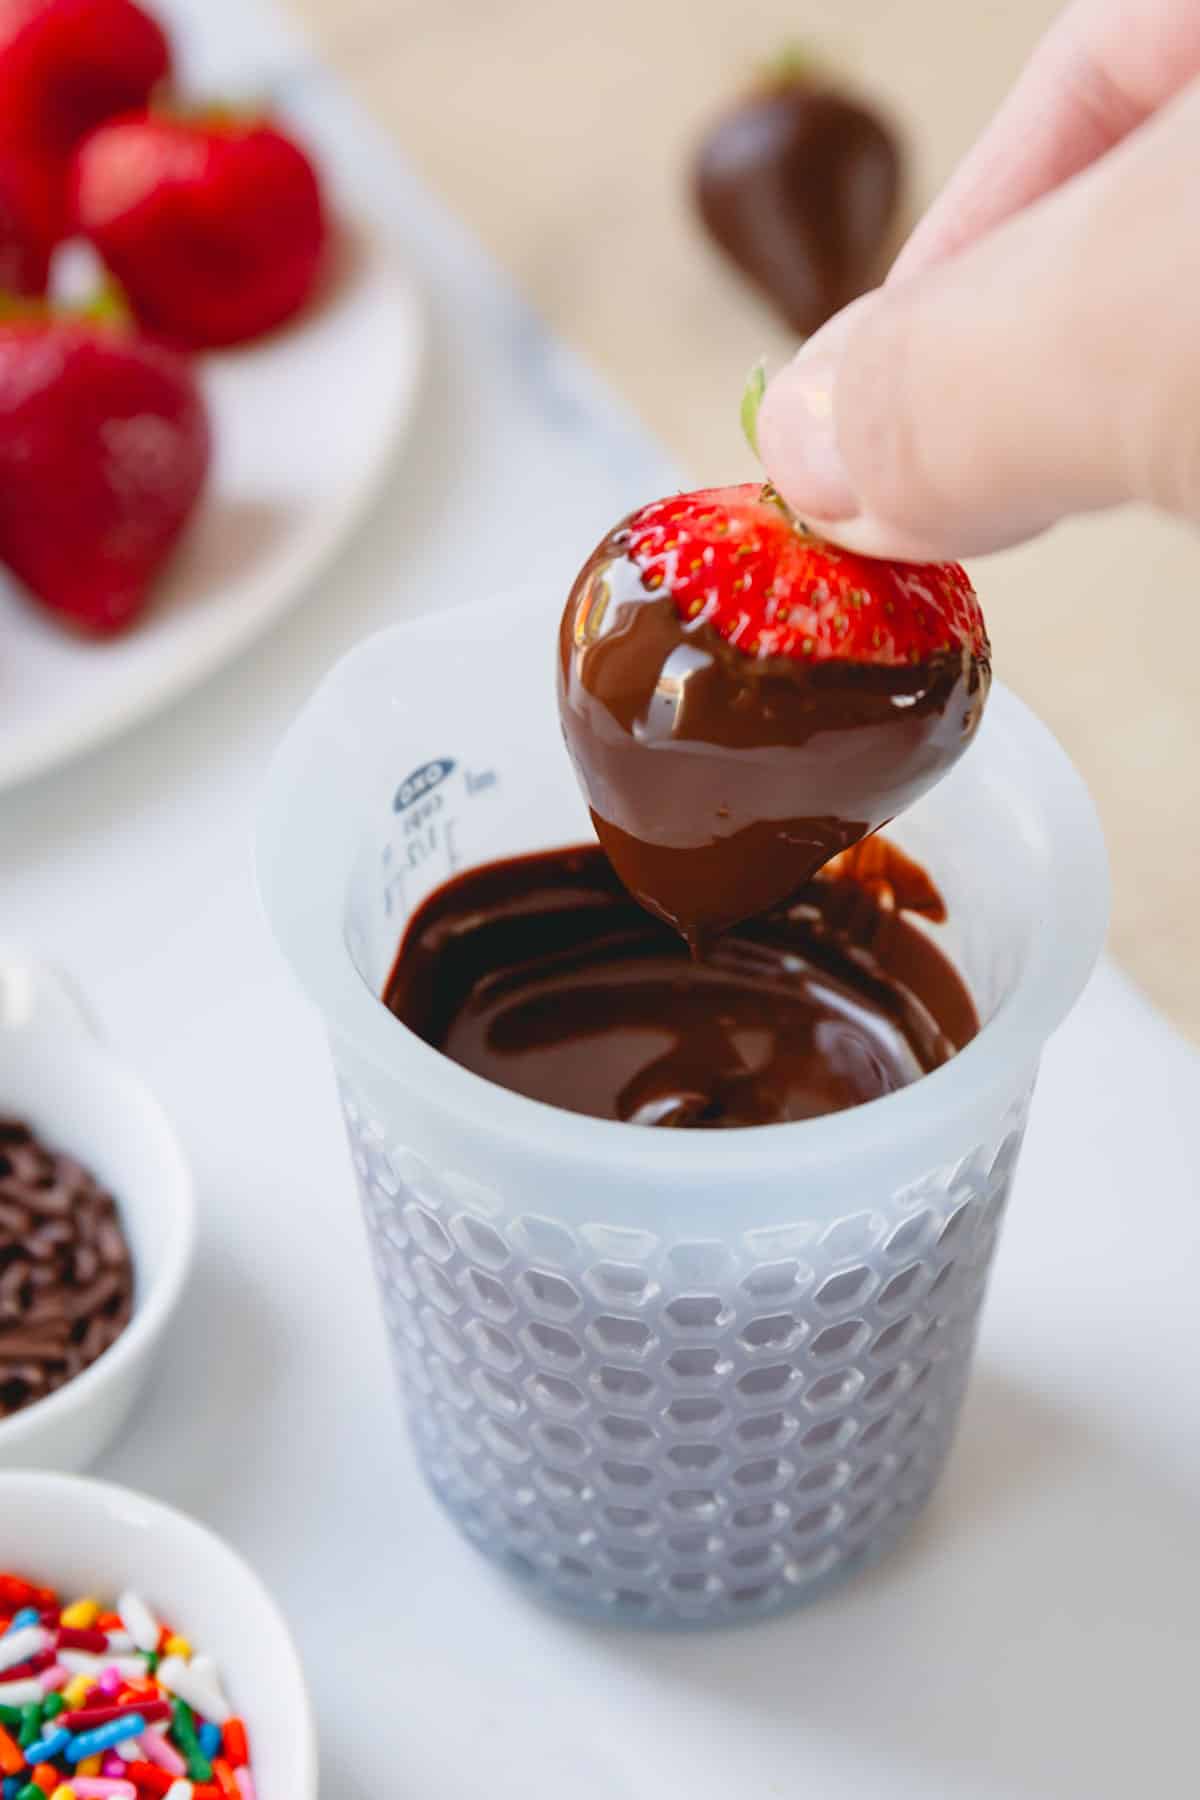 A hand holding a chocolate covered strawberry by the stem over a cup of melted chocolate.